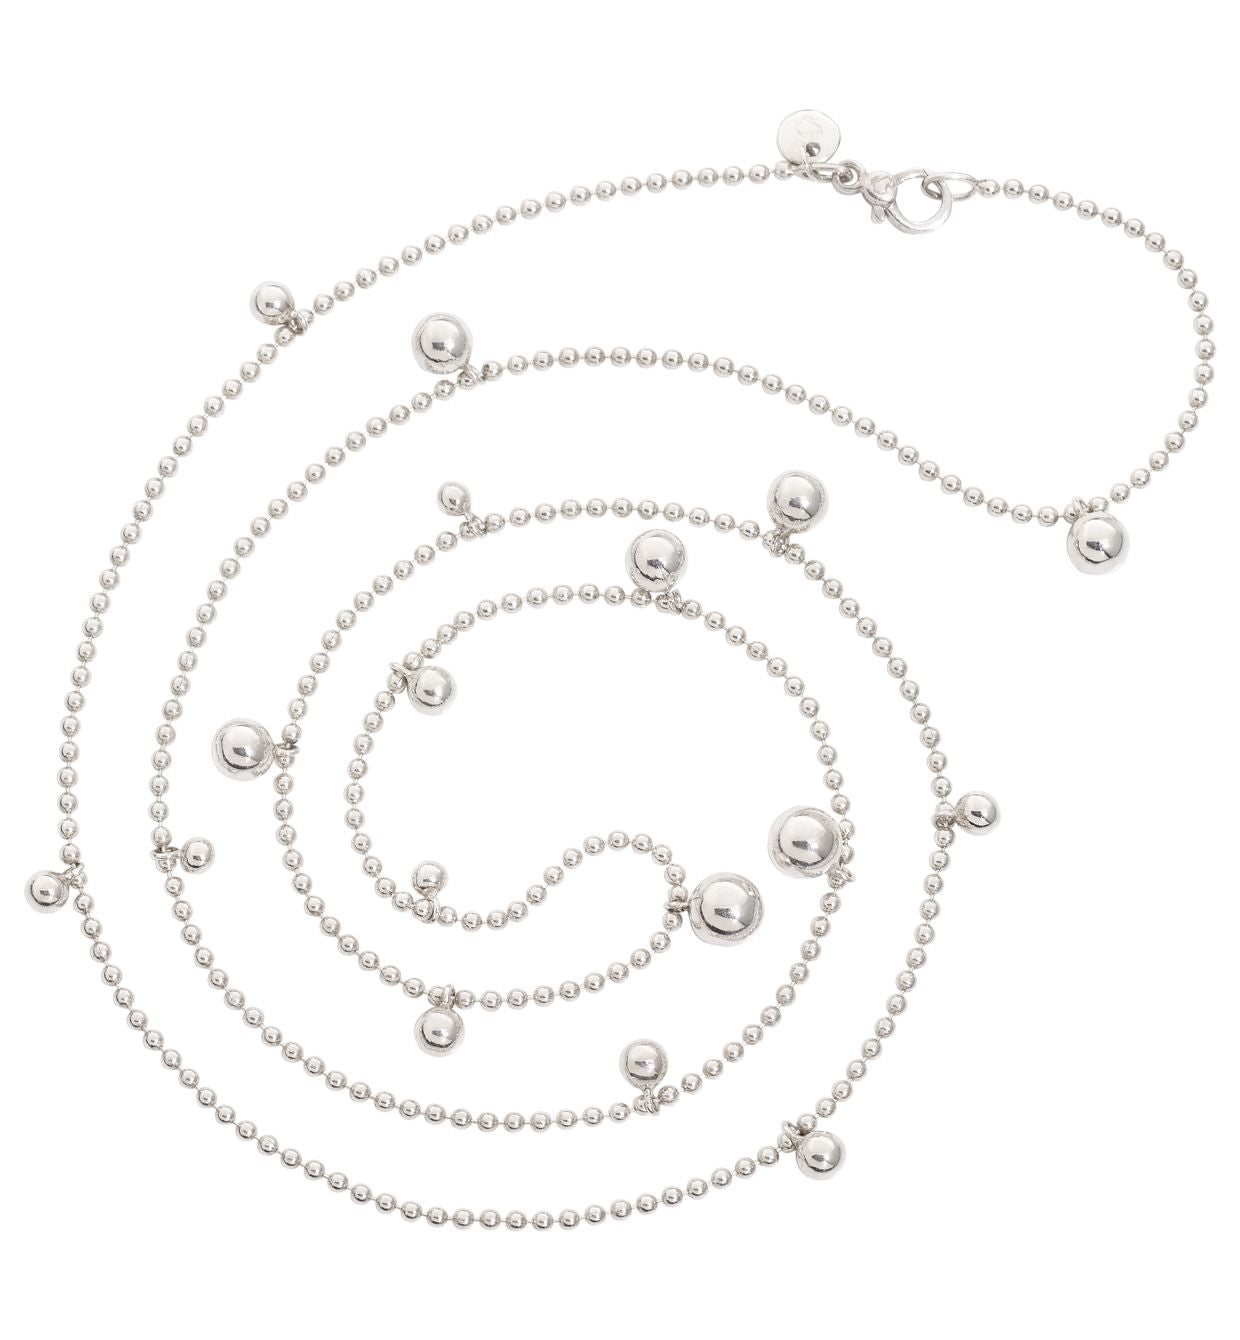 DoDo Bollicine Necklace with Spheres in Silver - Orsini Jewellers NZ